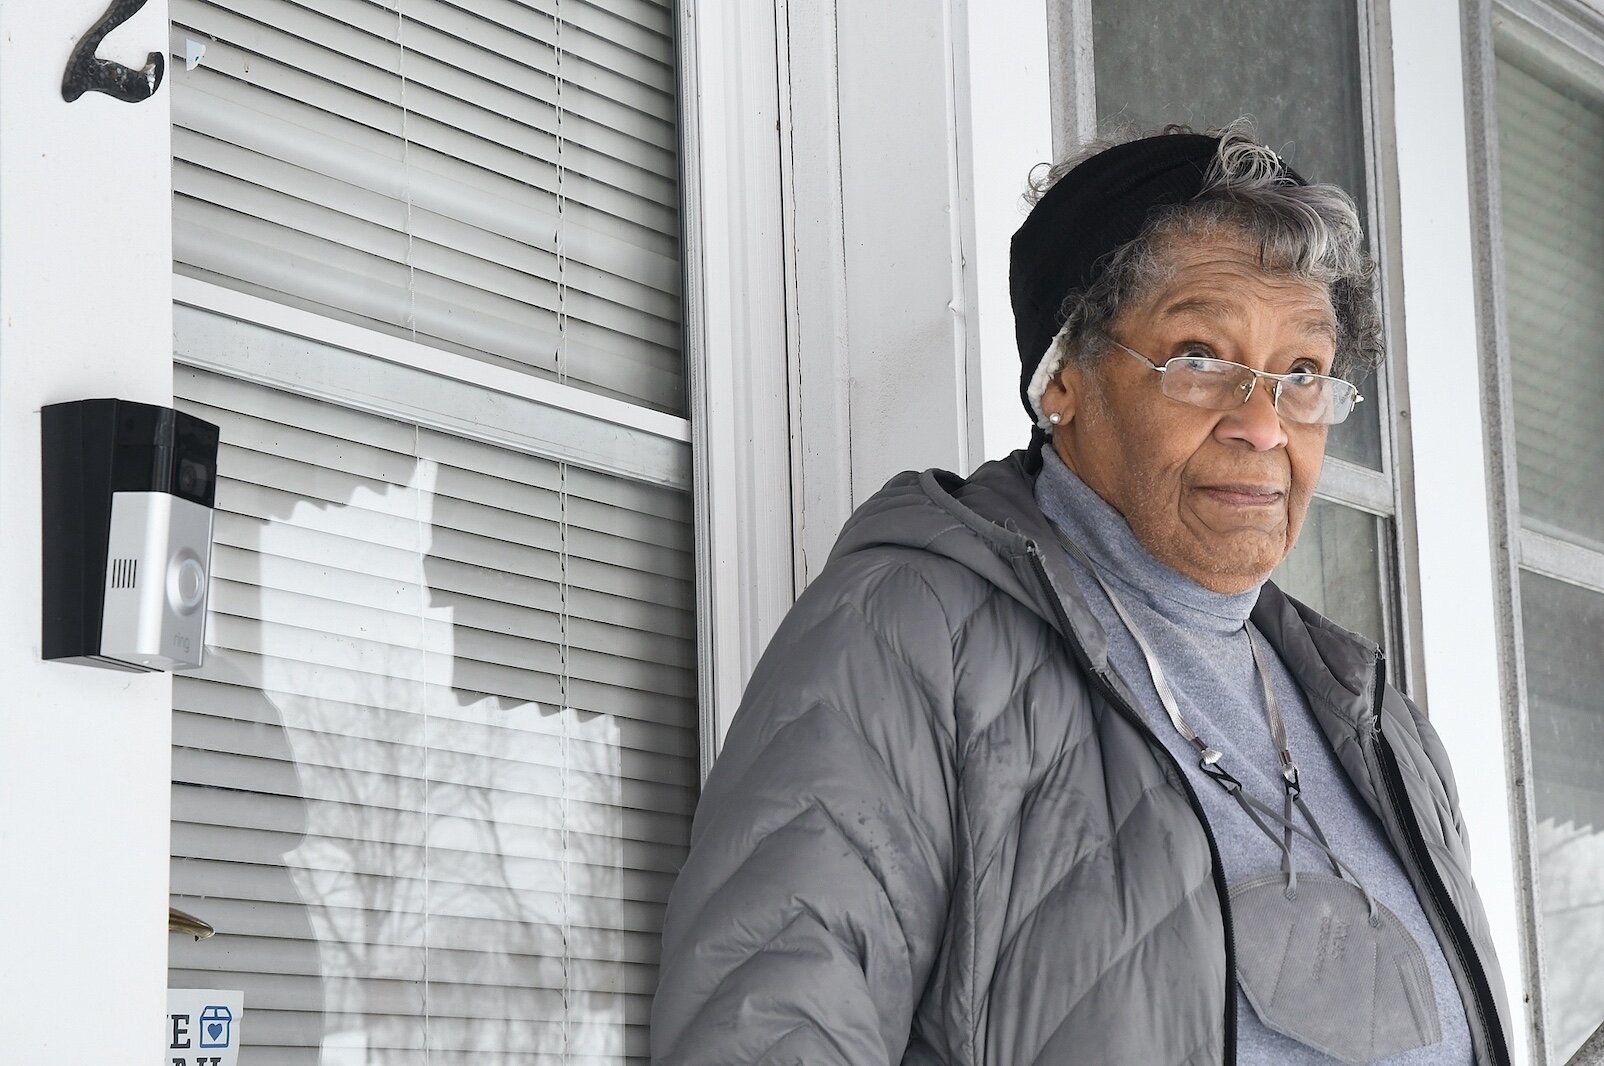 Shirley McKinney, who has a smart doorbell, stands in front of her home on Bowen Street.